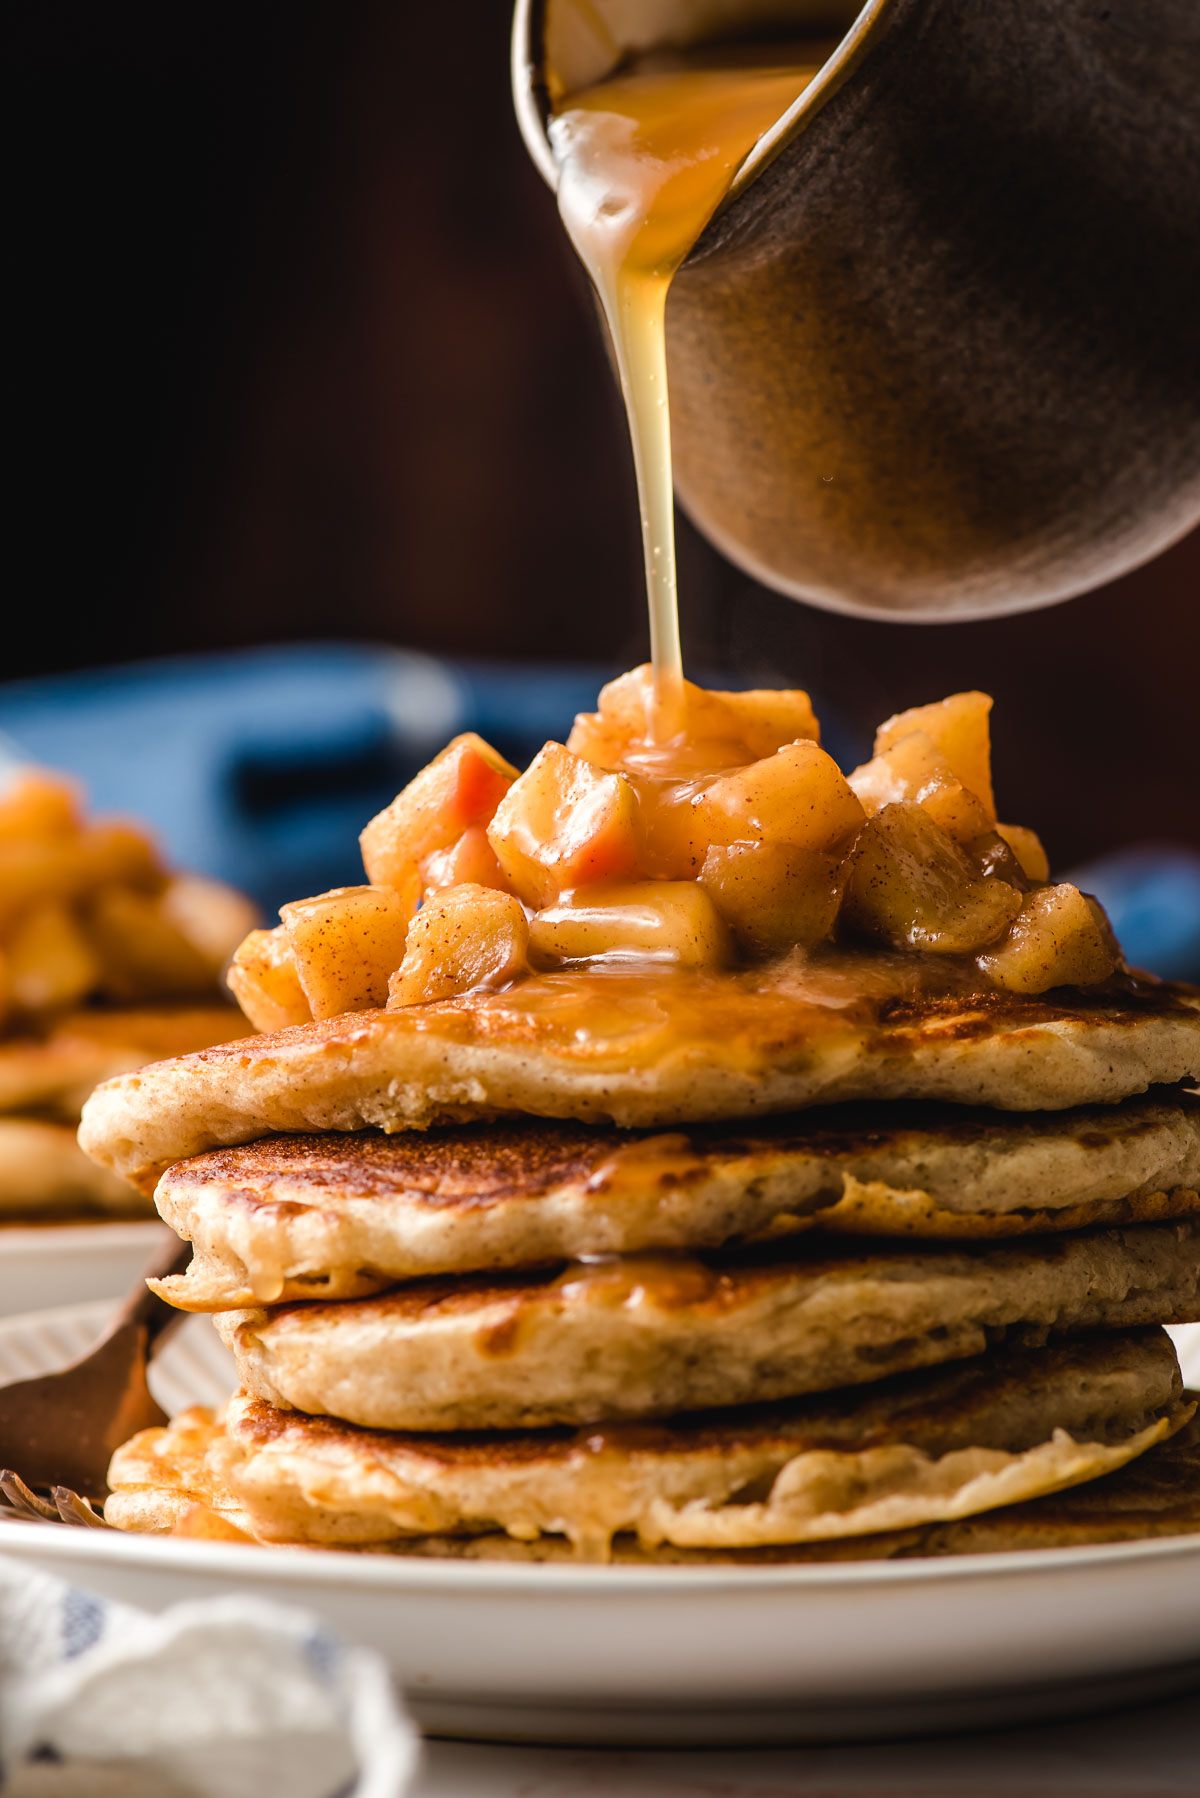 Apple cider syrup being poured over a stack of pancakes.